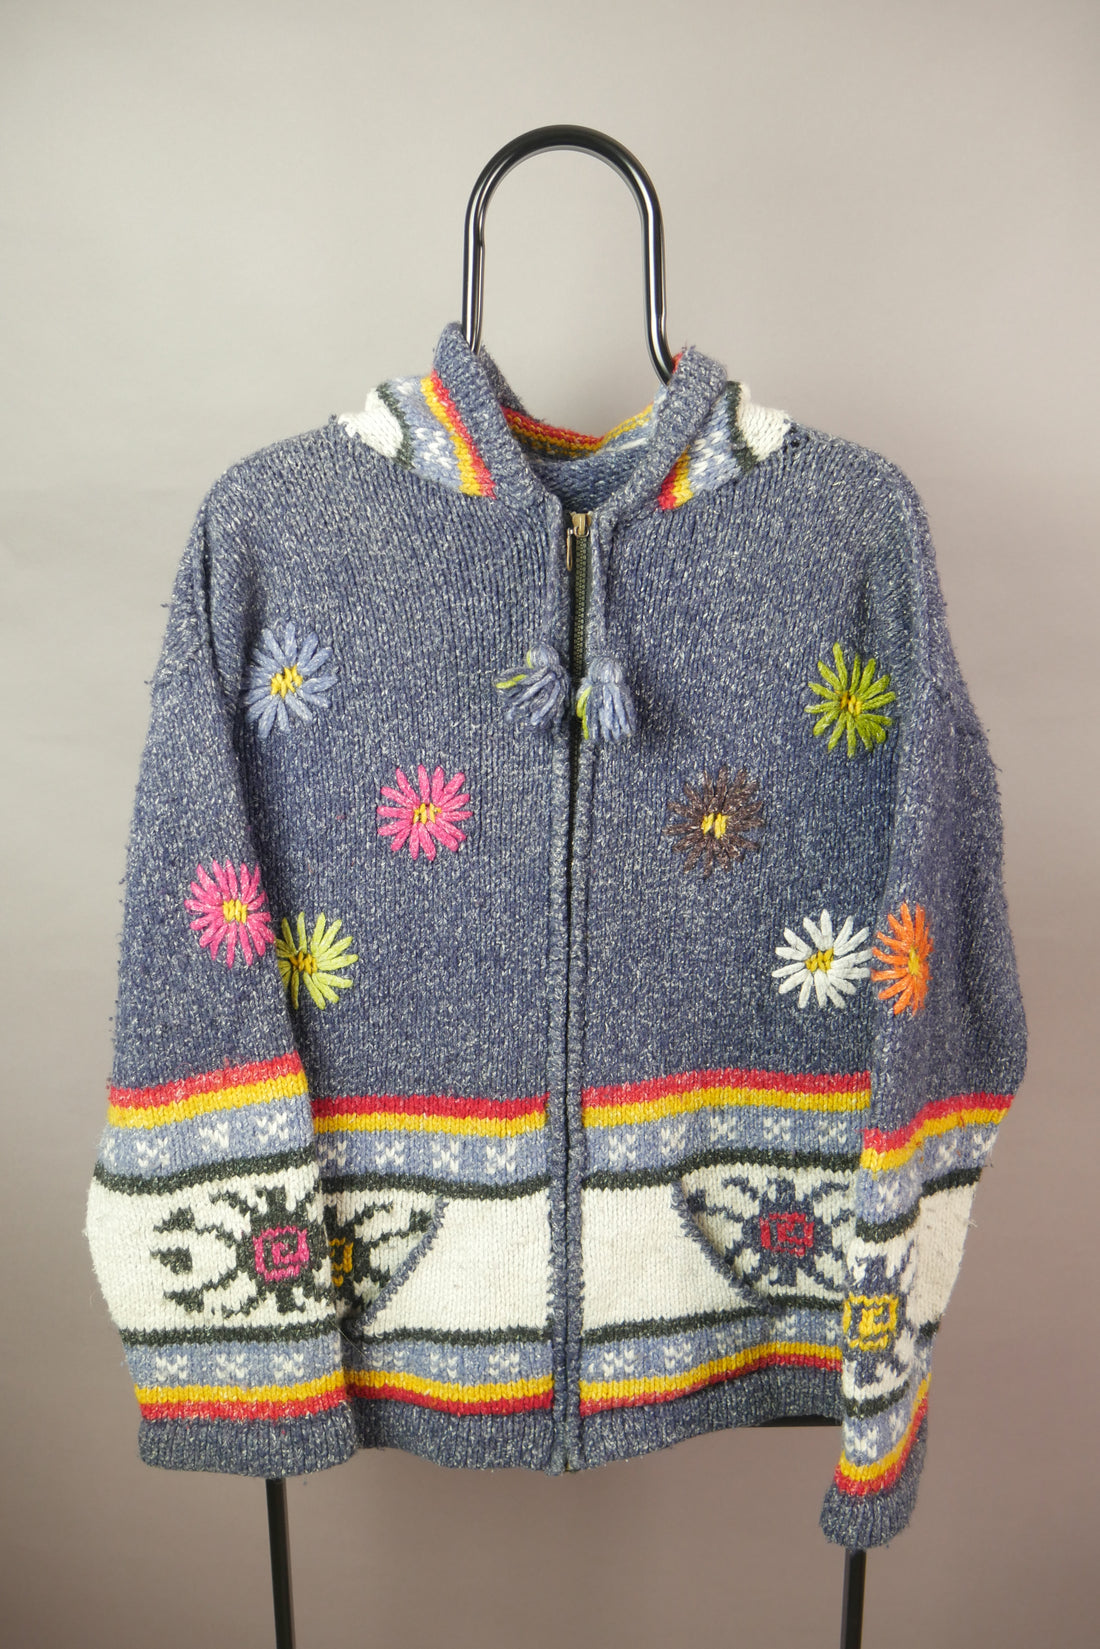 The Vintage Floral Embroidered  Hoodie (Women's L)